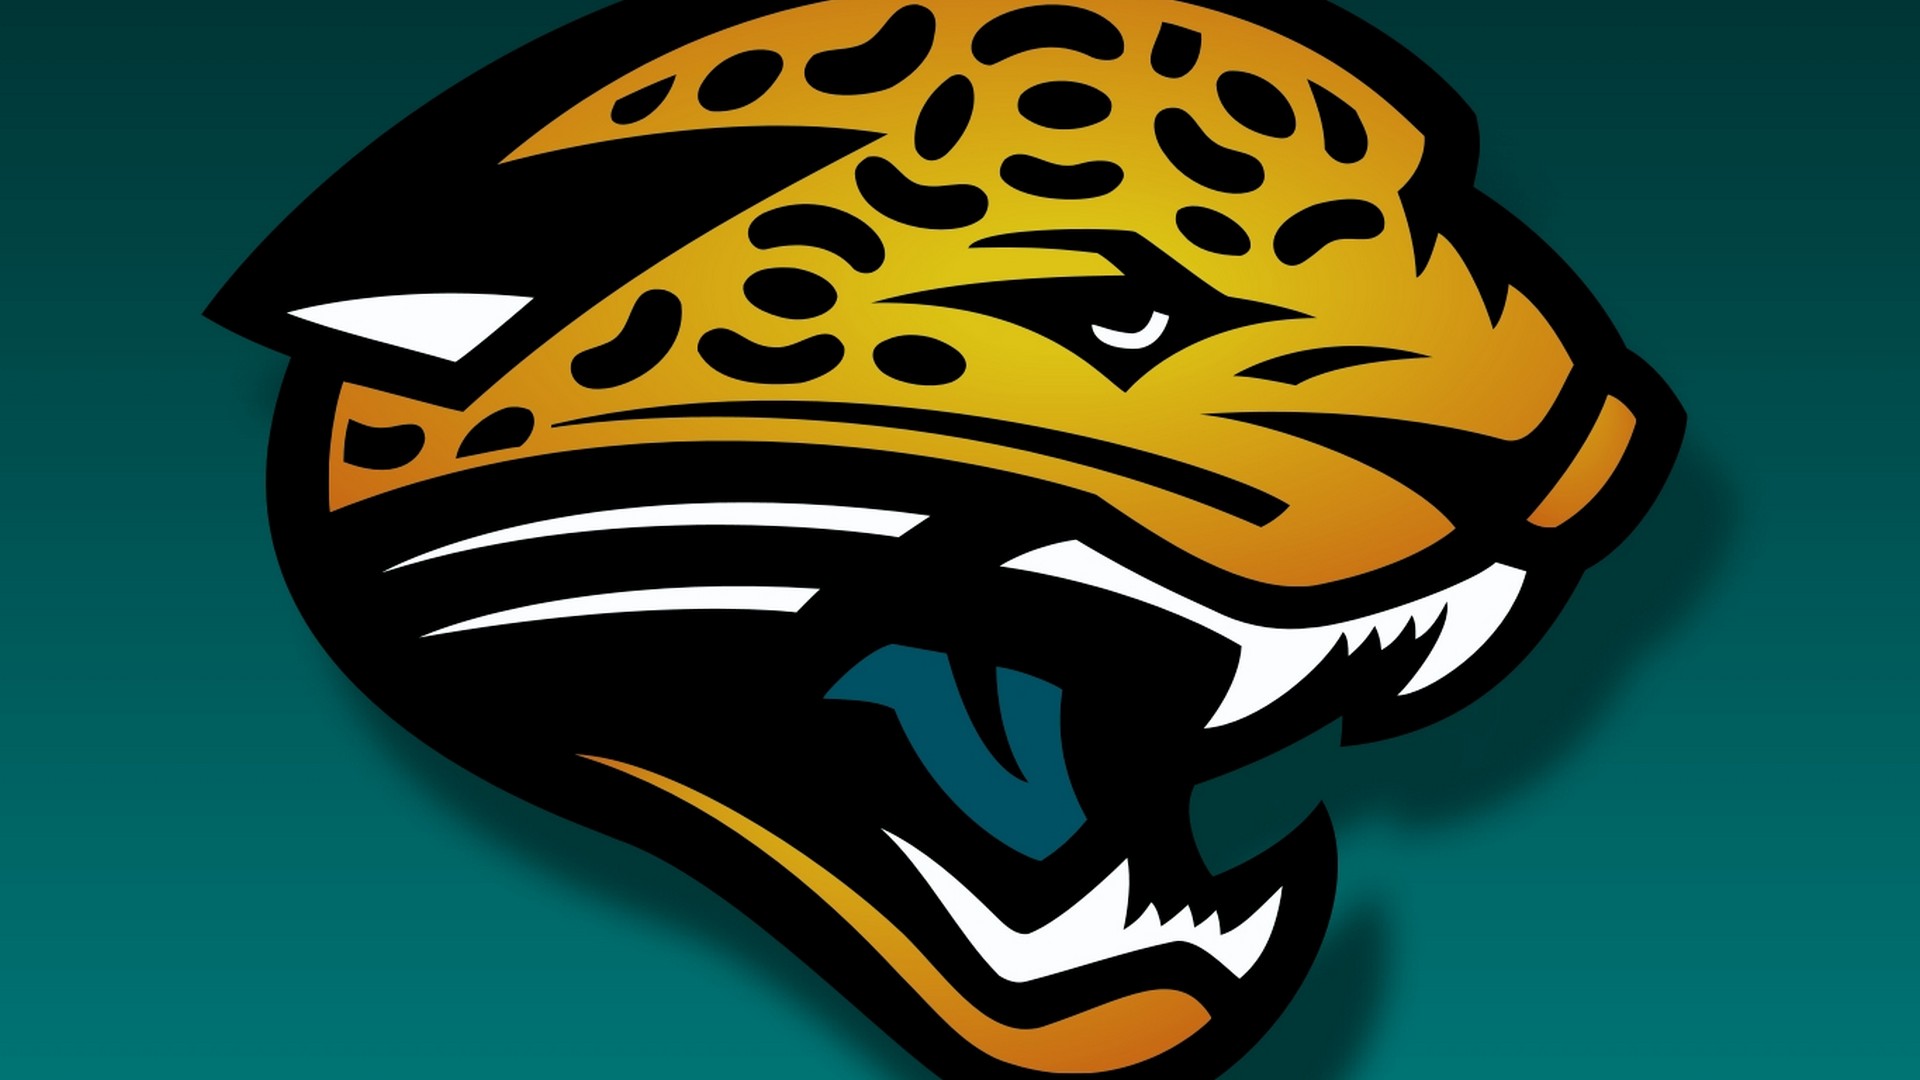 Jacksonville Jaguars Wallpaper For Mac With Resolution 1920X1080 pixel. You can make this wallpaper for your Mac or Windows Desktop Background, iPhone, Android or Tablet and another Smartphone device for free